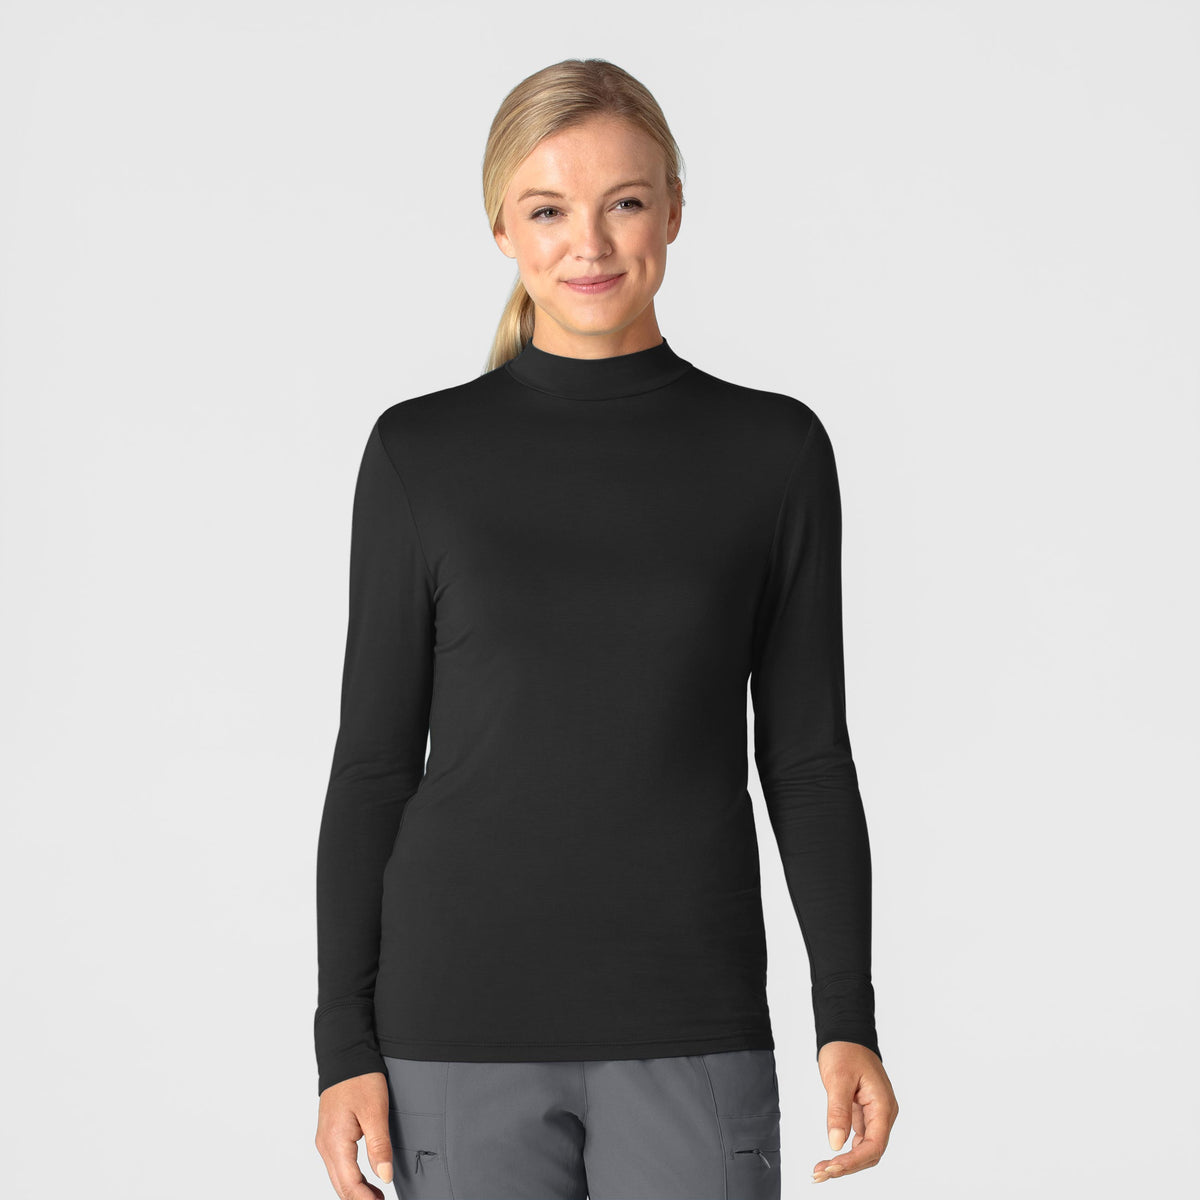 Knits and Layers Women’s Long Sleeve Mock Neck Silky Tee Black